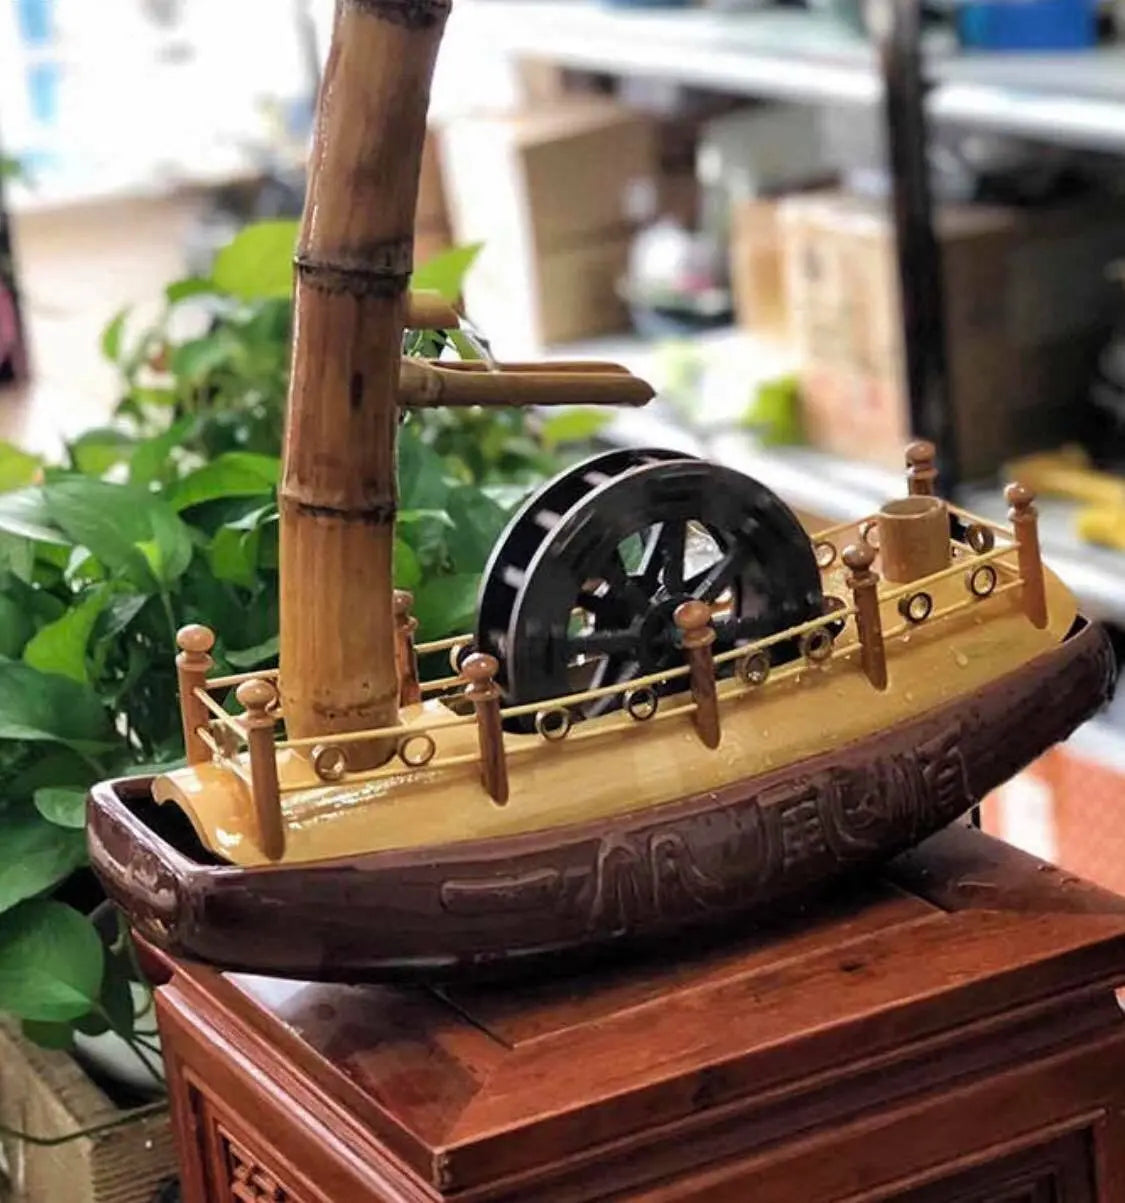 Bamboo Water Fountain Handmade Handcrafted Boat Water Feature Spinning Wheels everythingbamboo